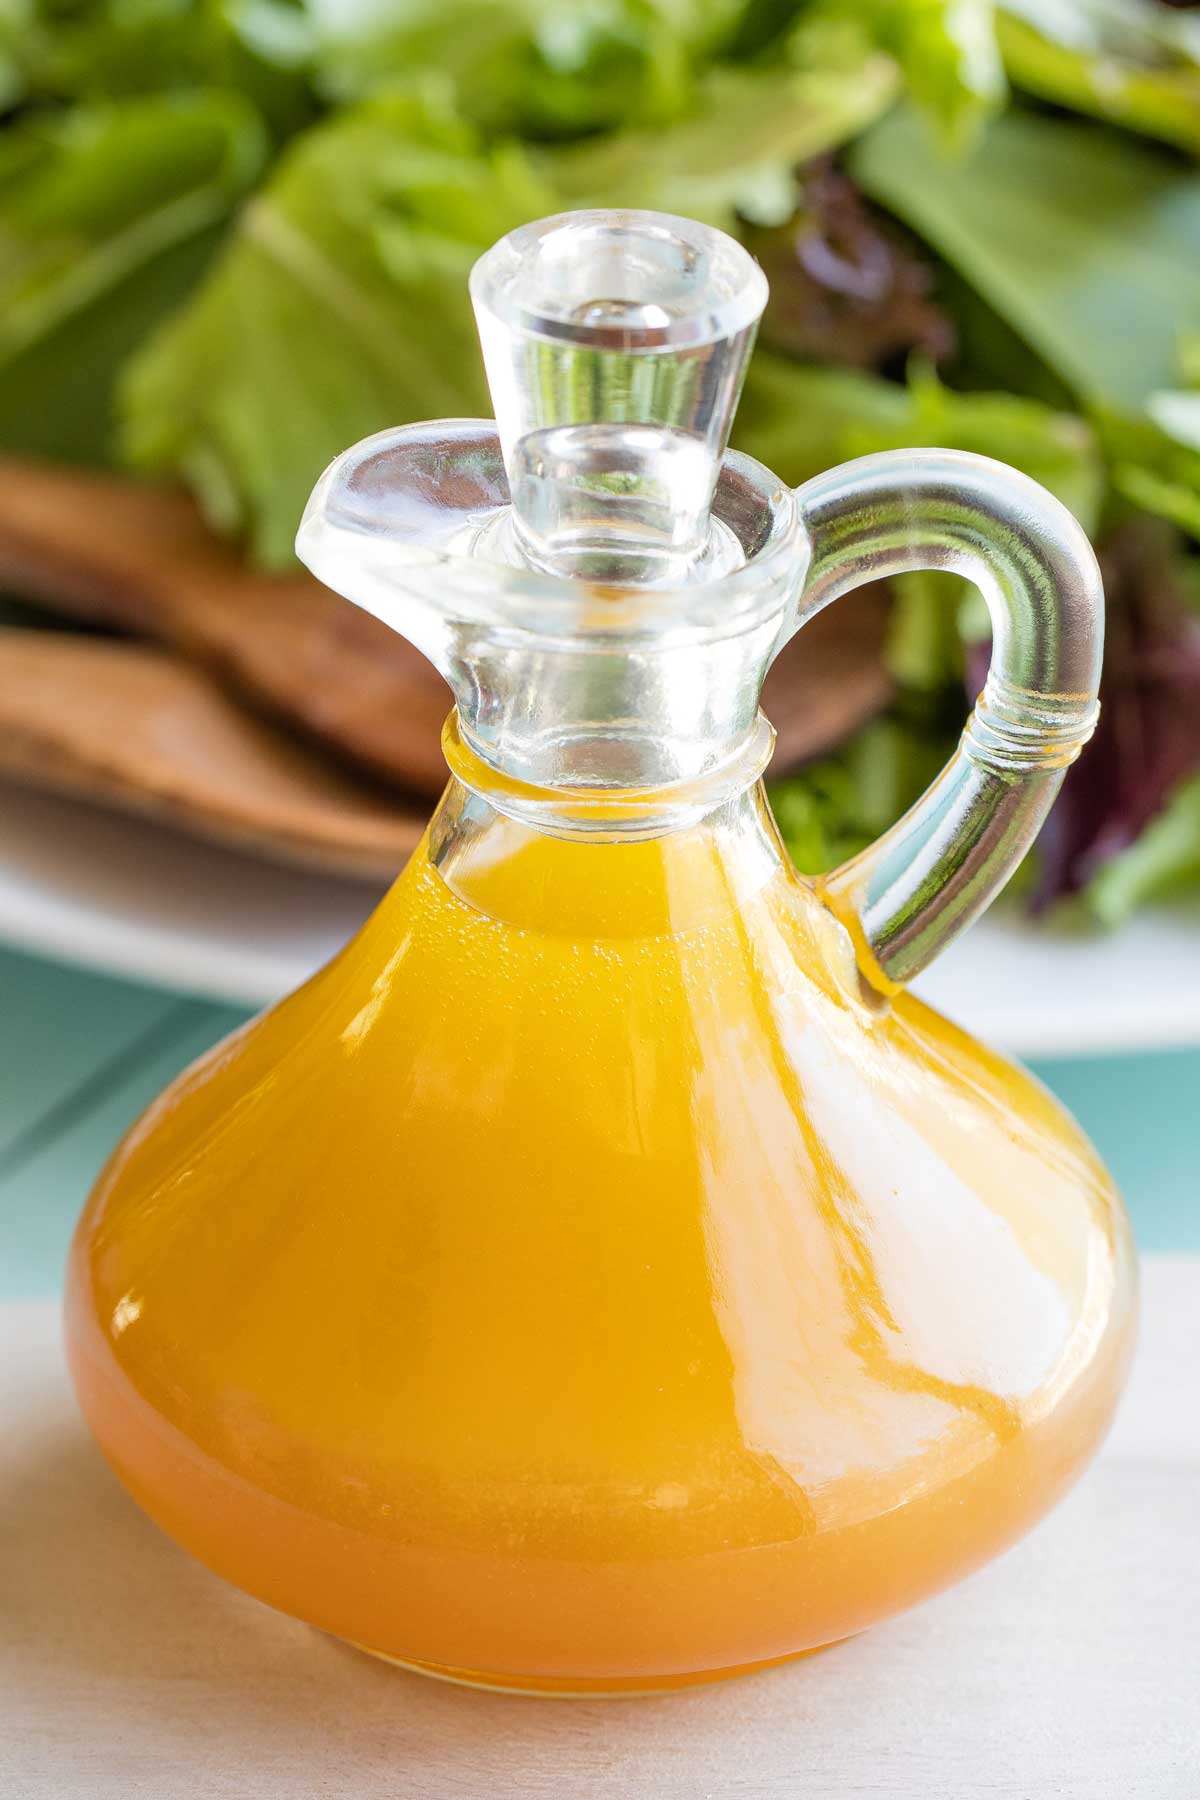 Cruet of Honey Balsamic dressing with salad in background.